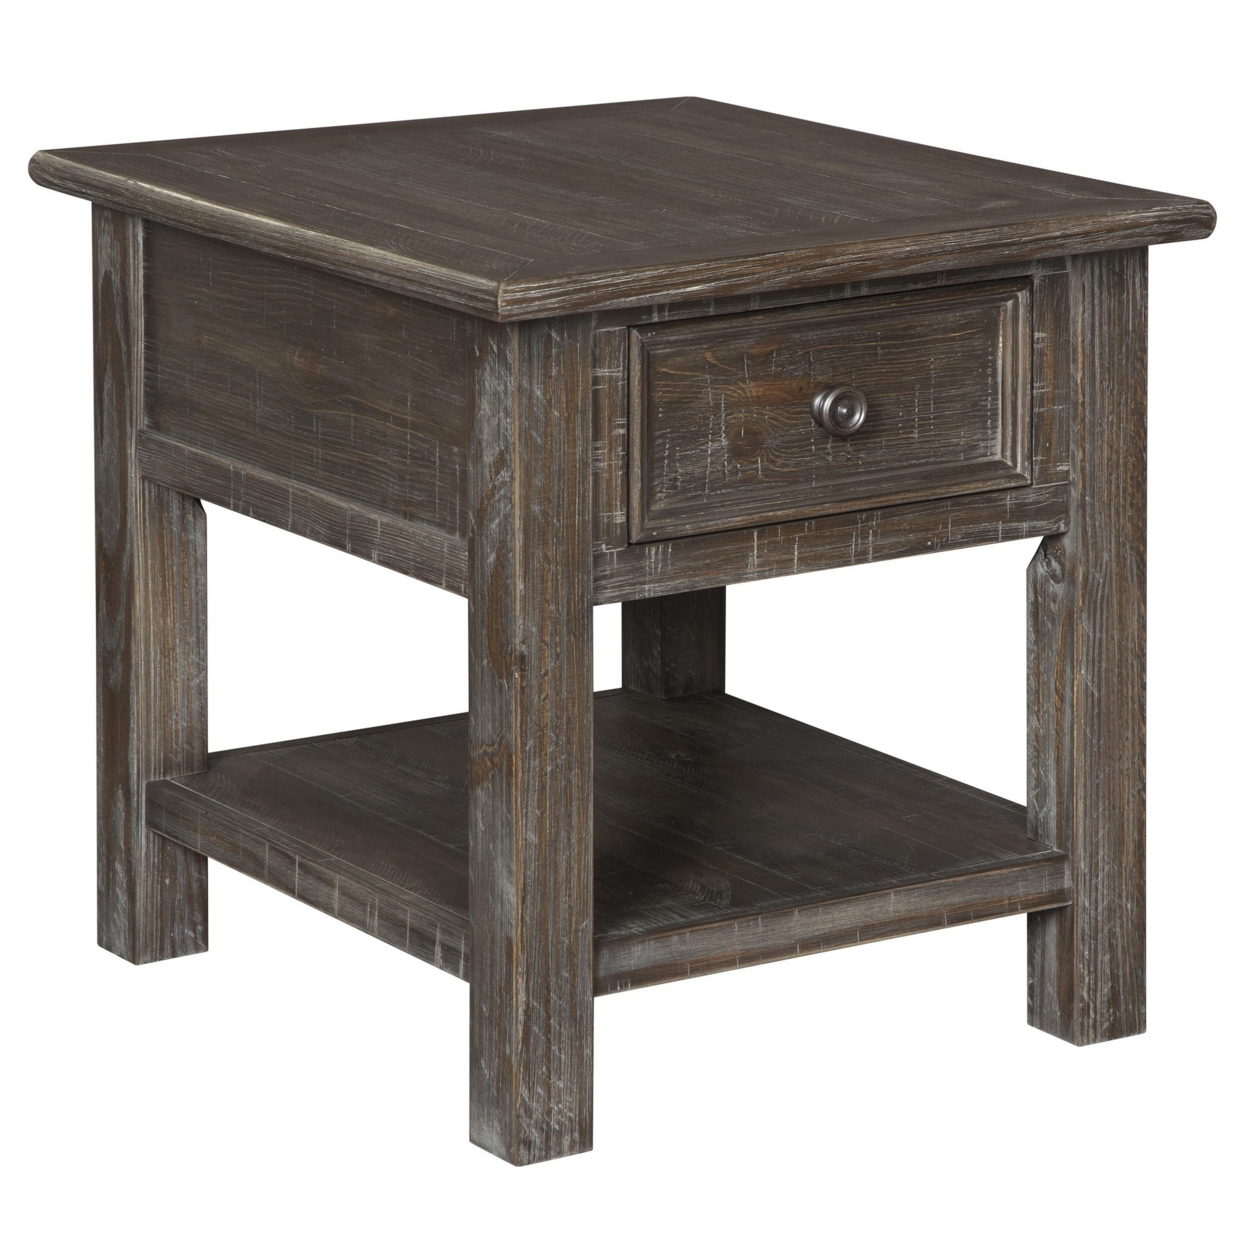 1 Drawer Rustic Wooden End Table With Open Bottom Shelf, Brown- Saltoro Sherpi